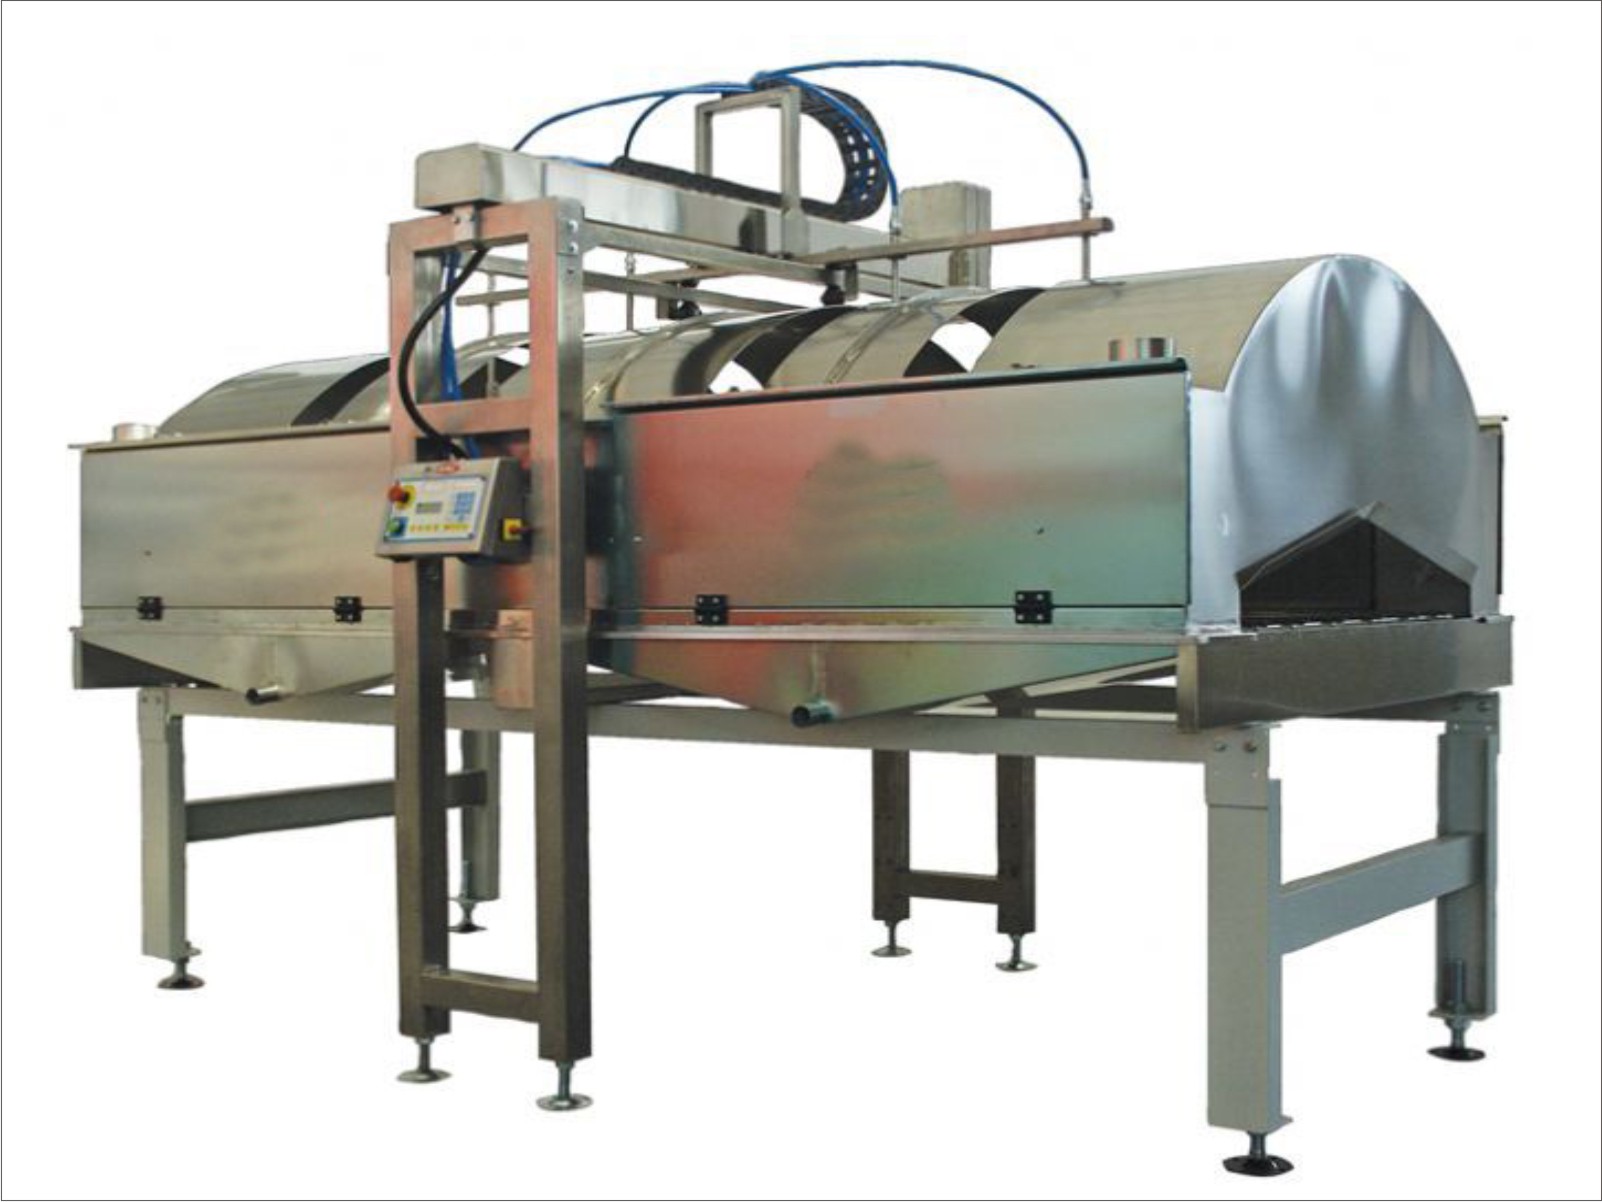 Airless system for application of glazes on large sizes.